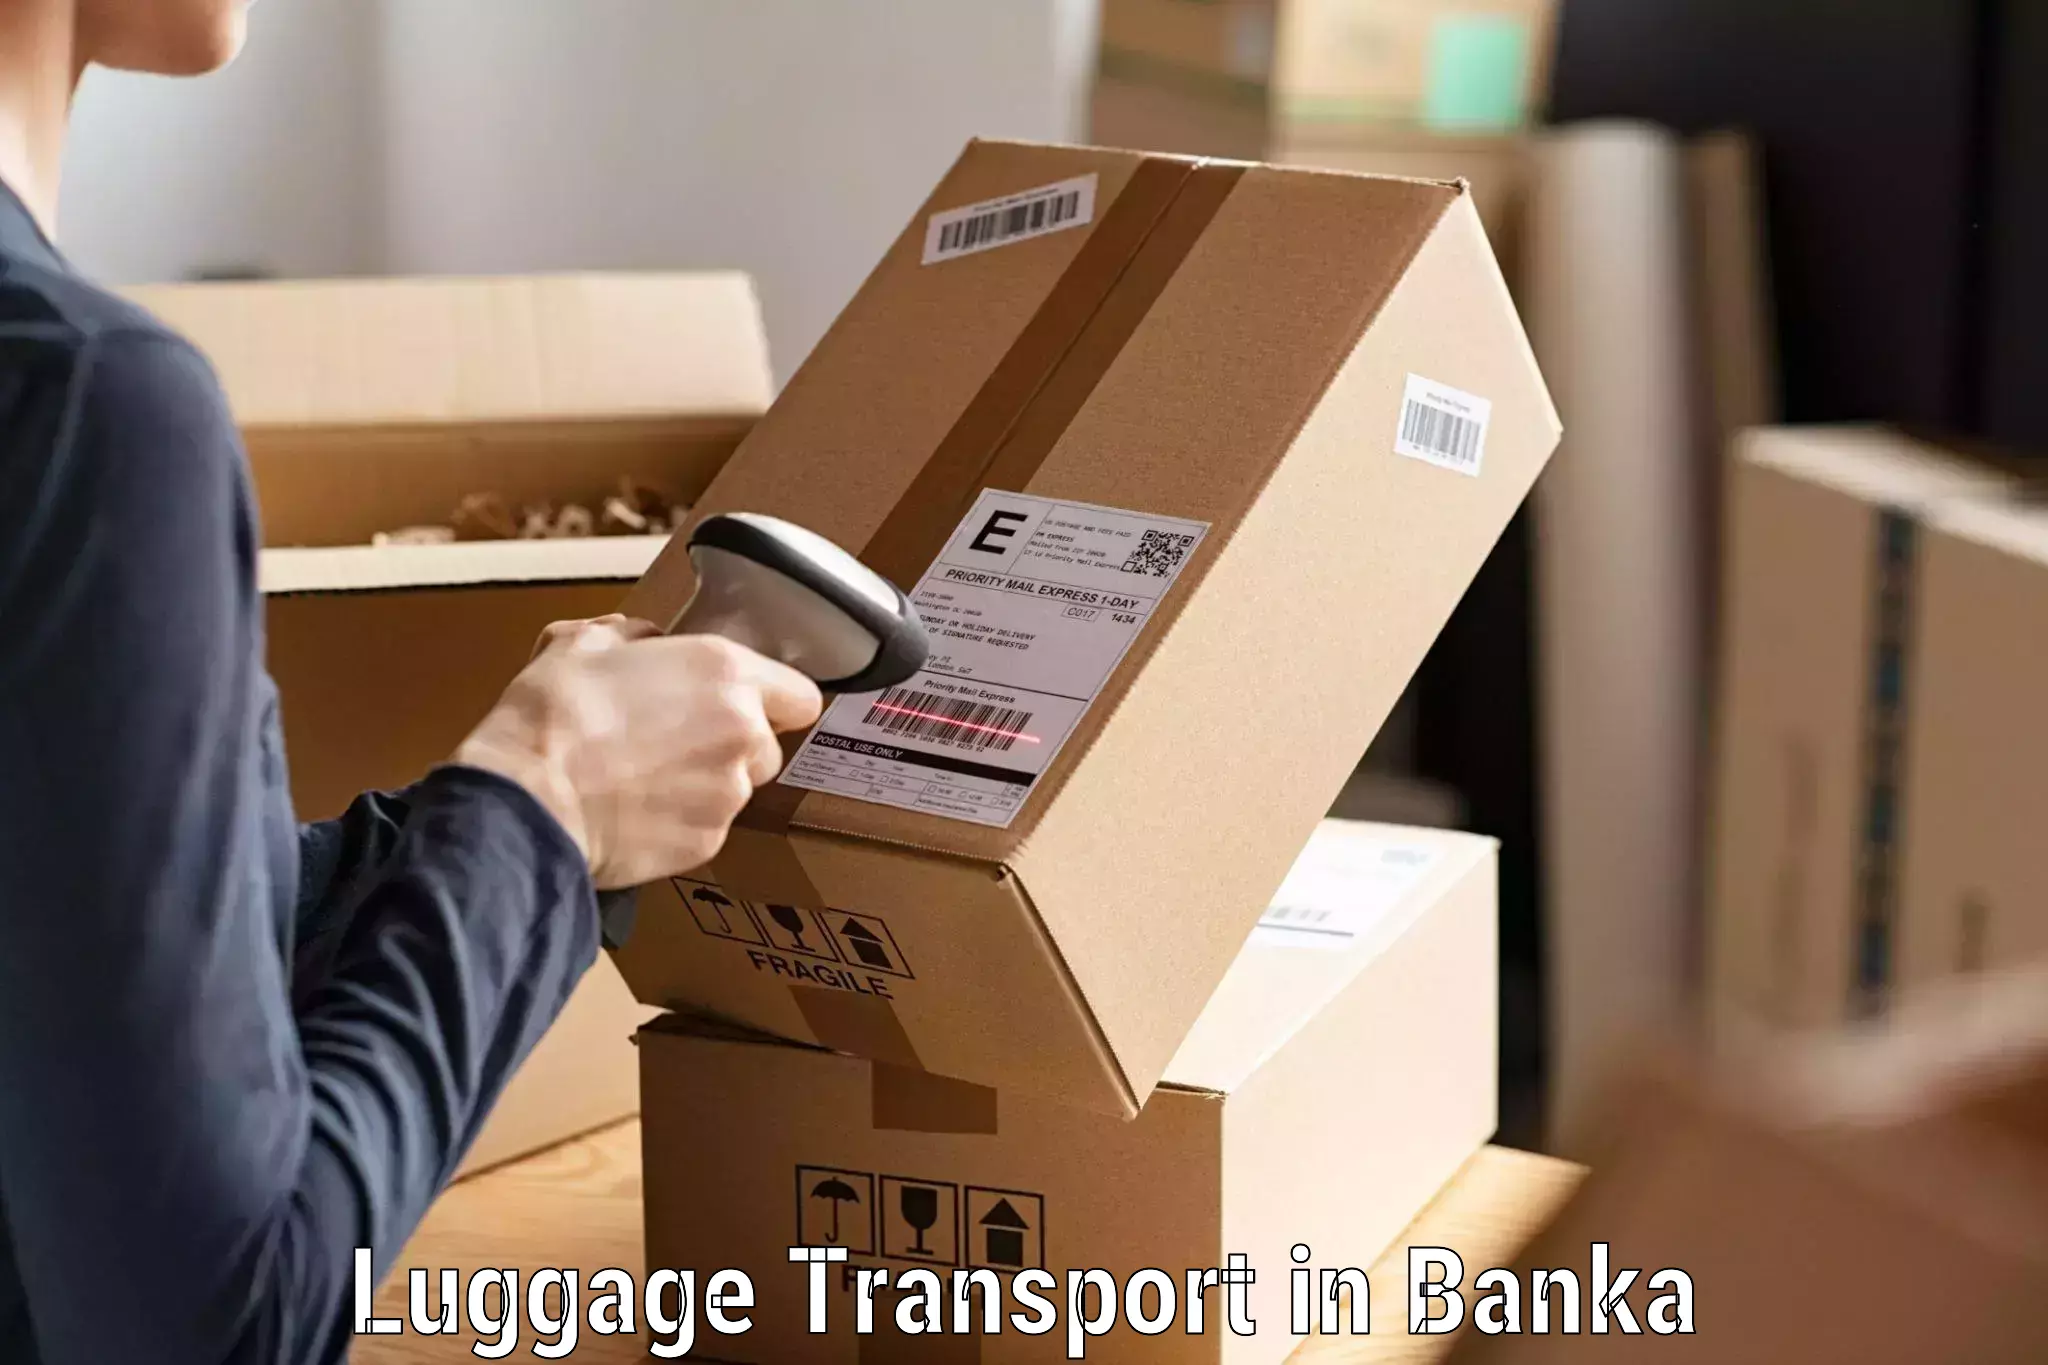 Baggage delivery support in Banka